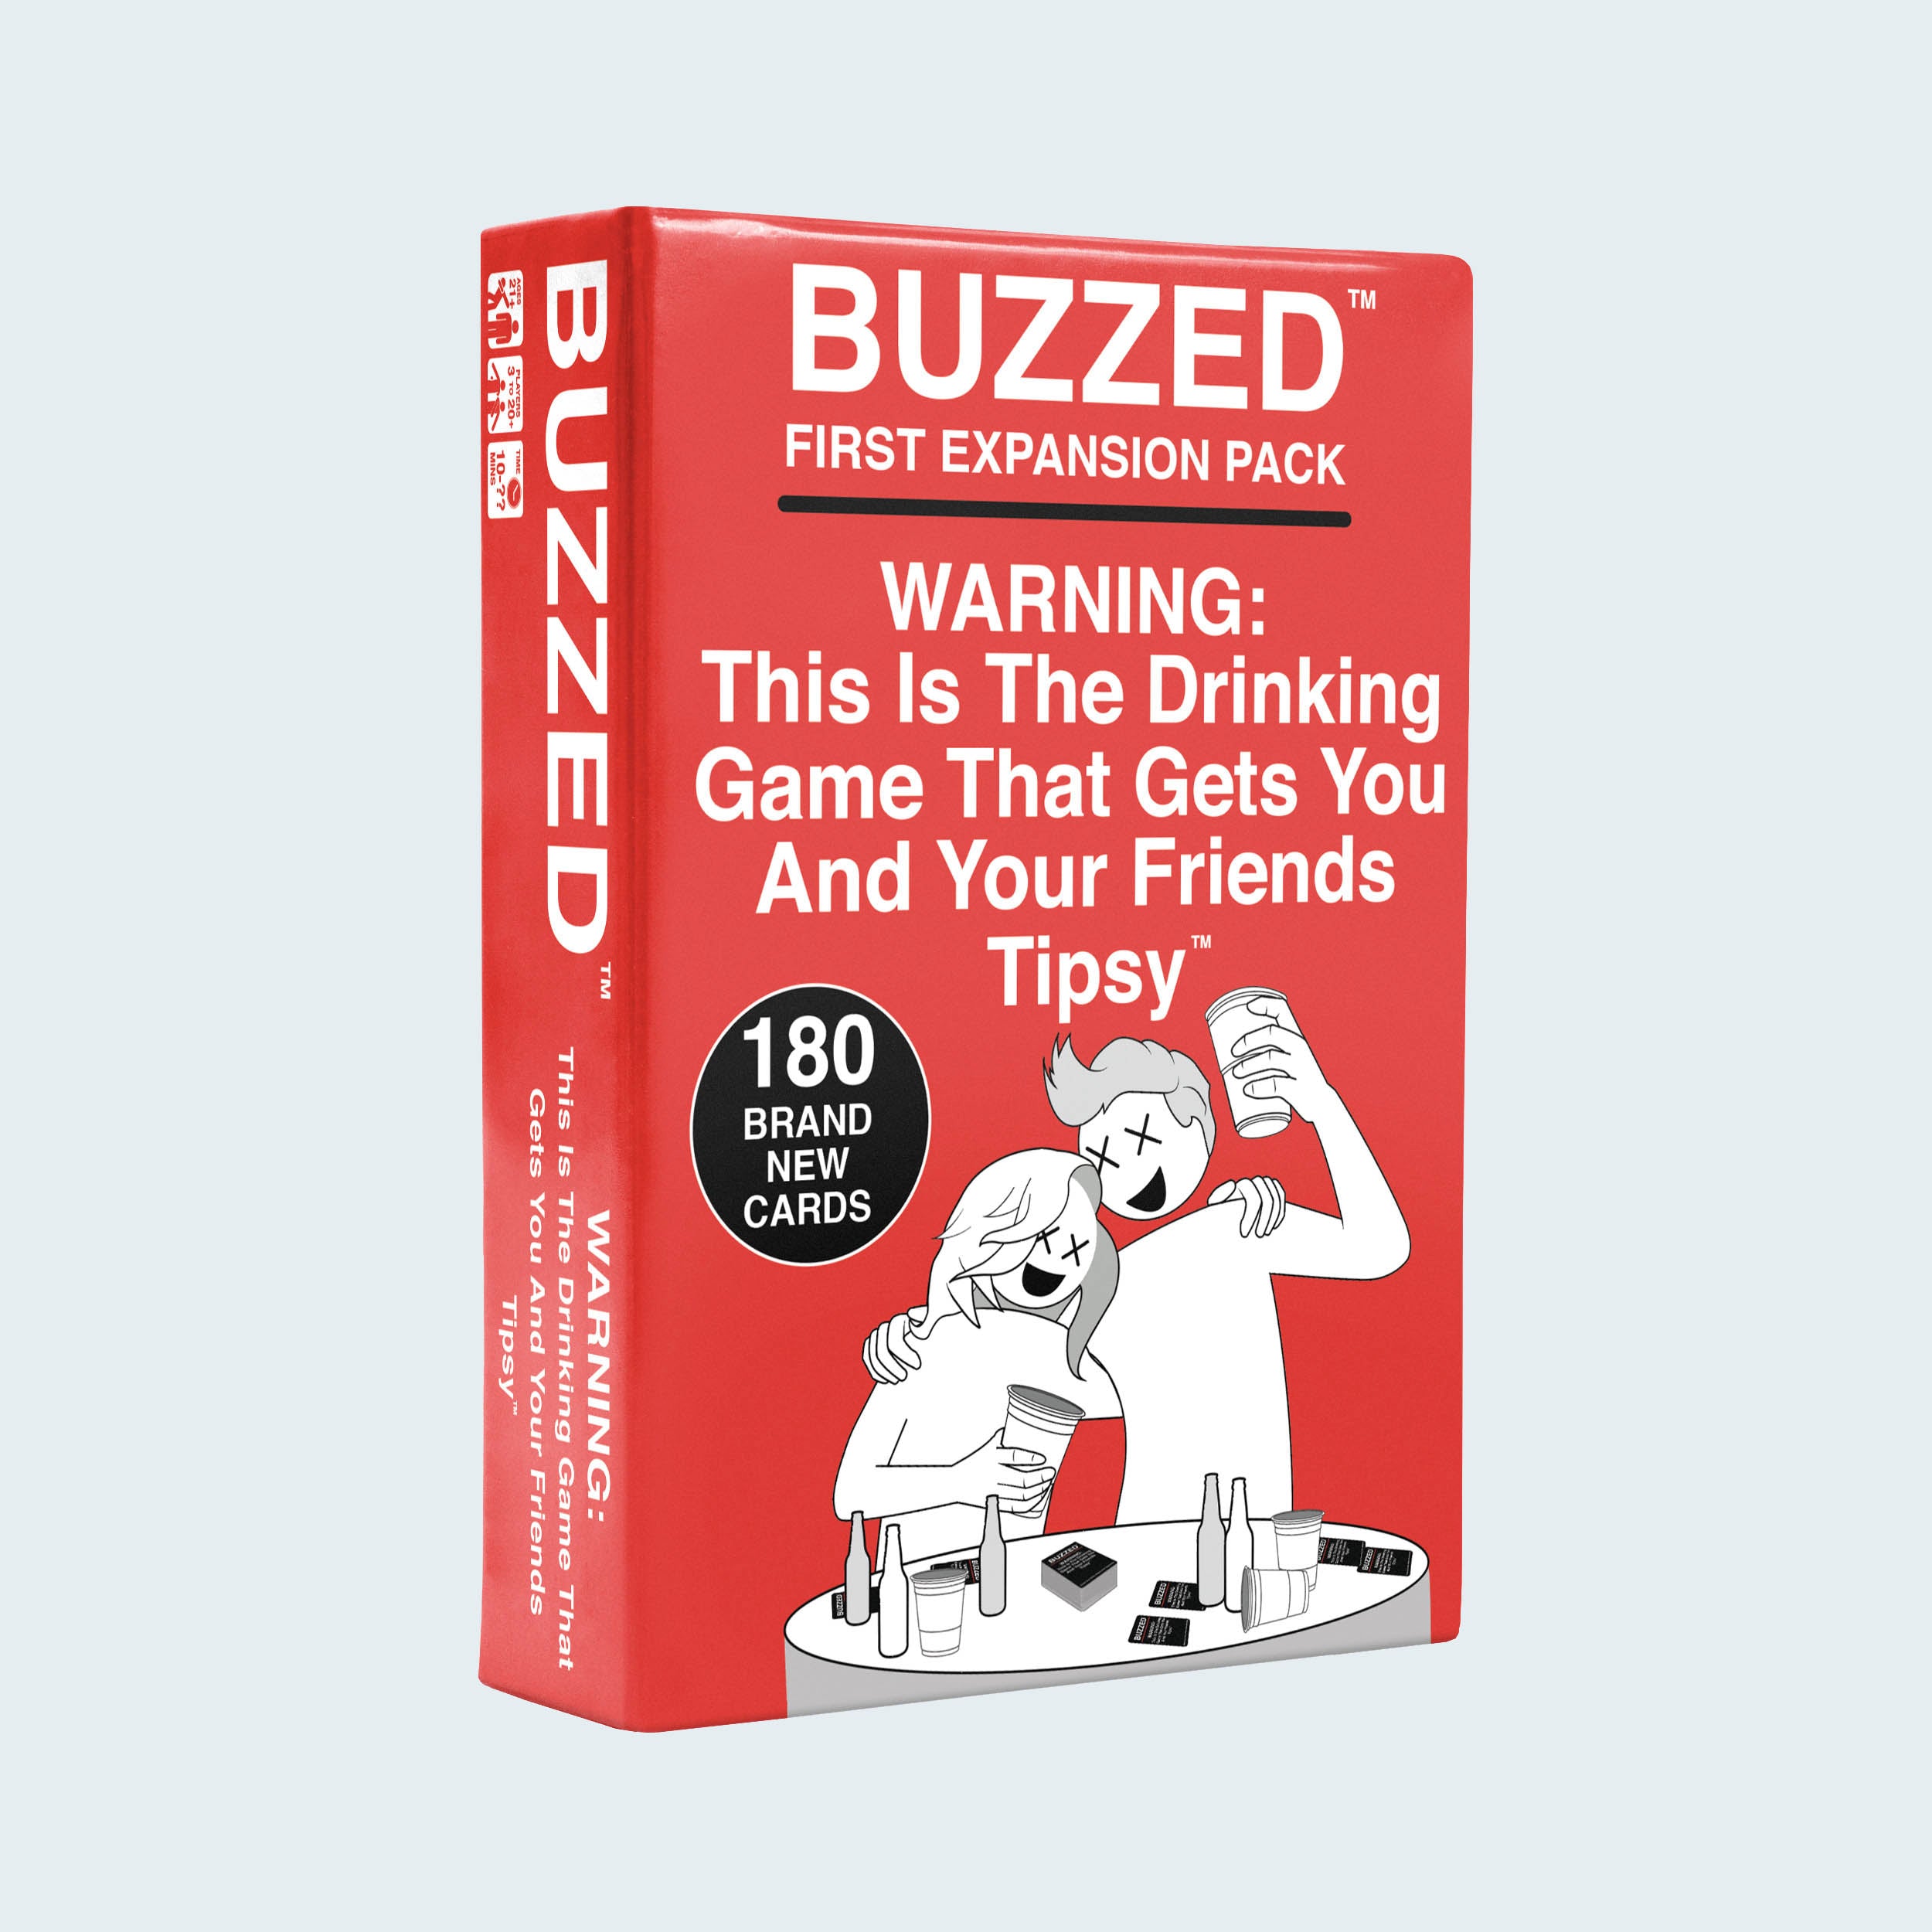 buzzed-expansion-pack-1-game-box-and-game-play-01-what-do-you-meme-by-relatable